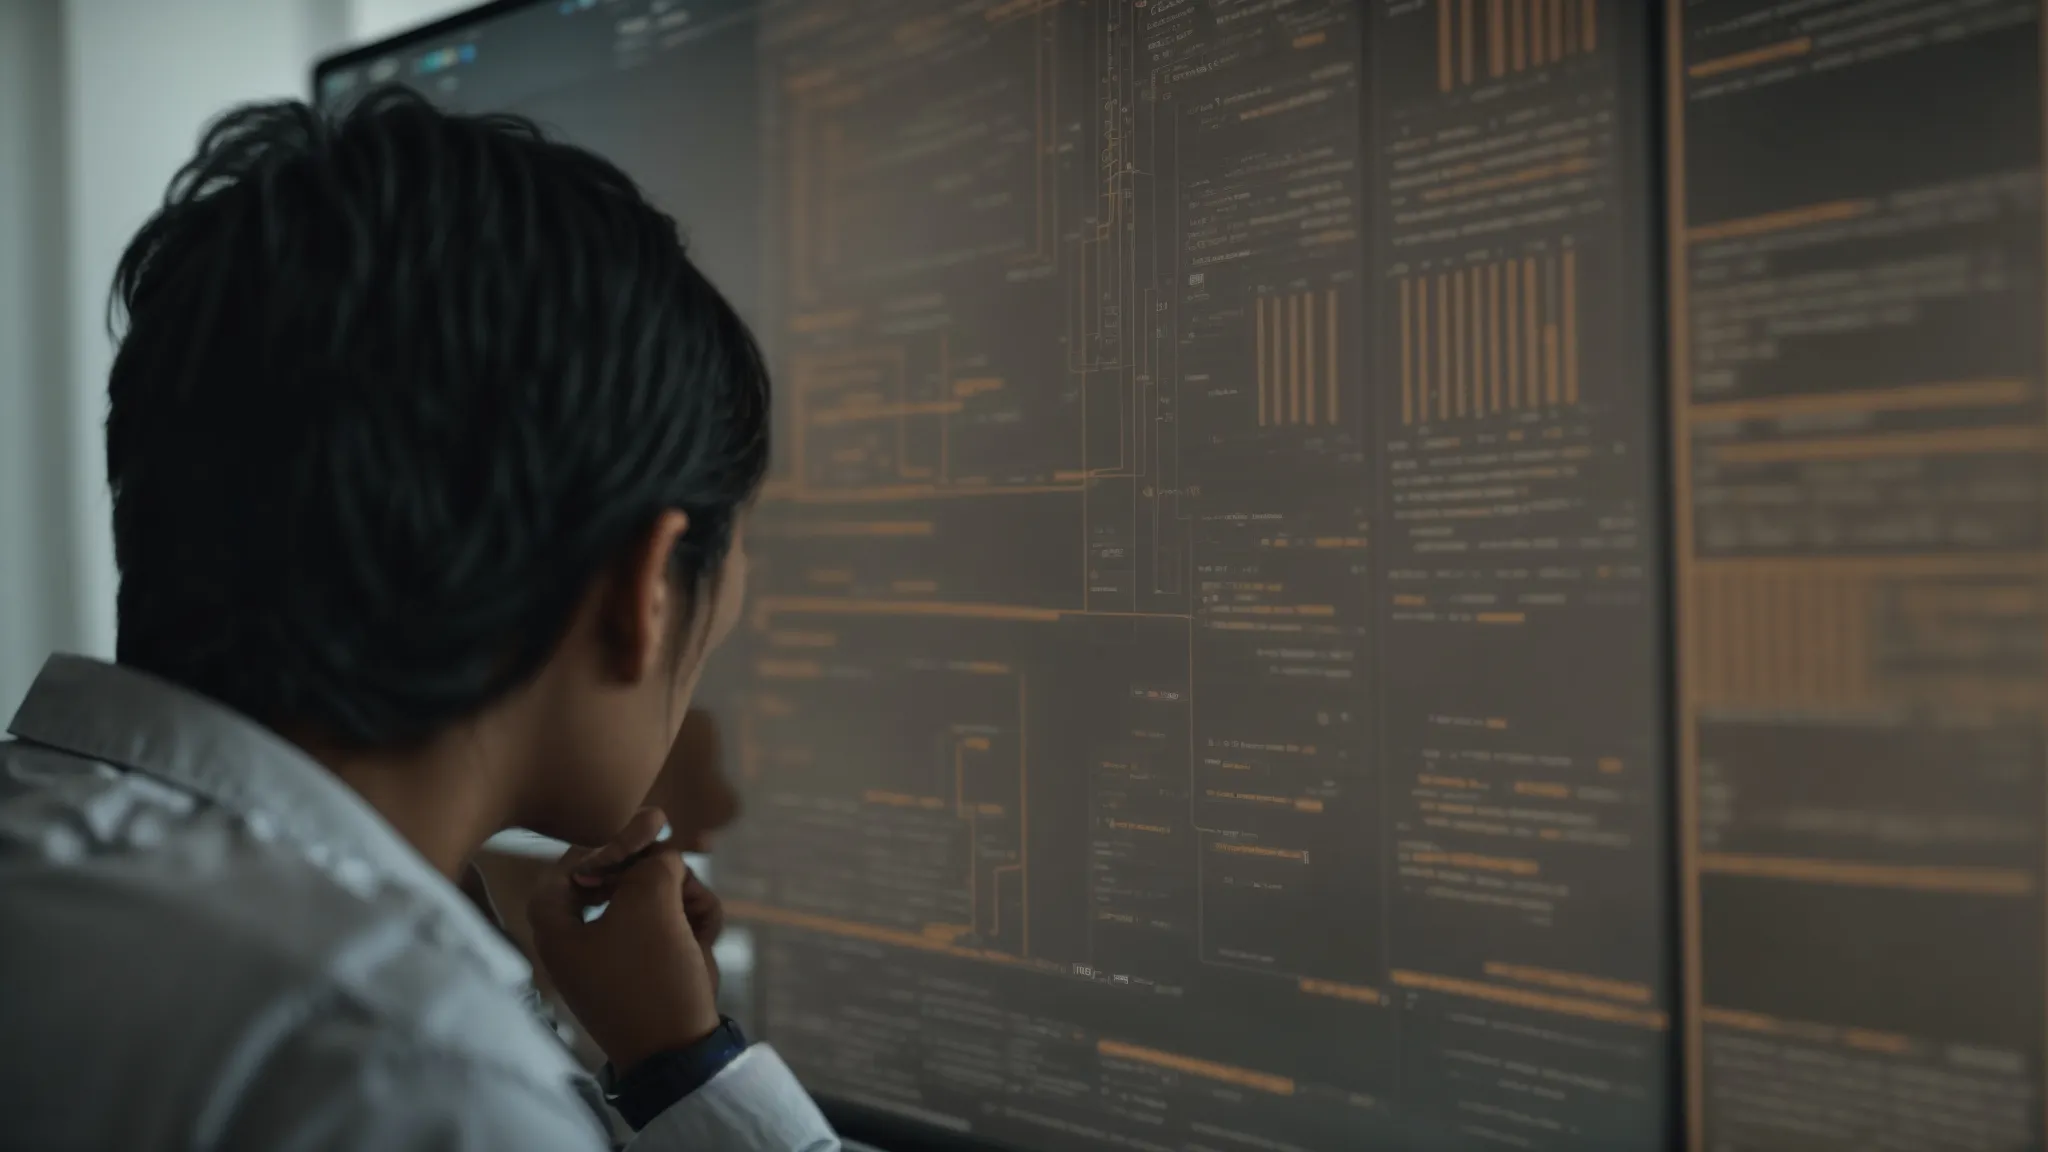 a person intently studying a complex flowchart on a computer screen in a well-lit office.